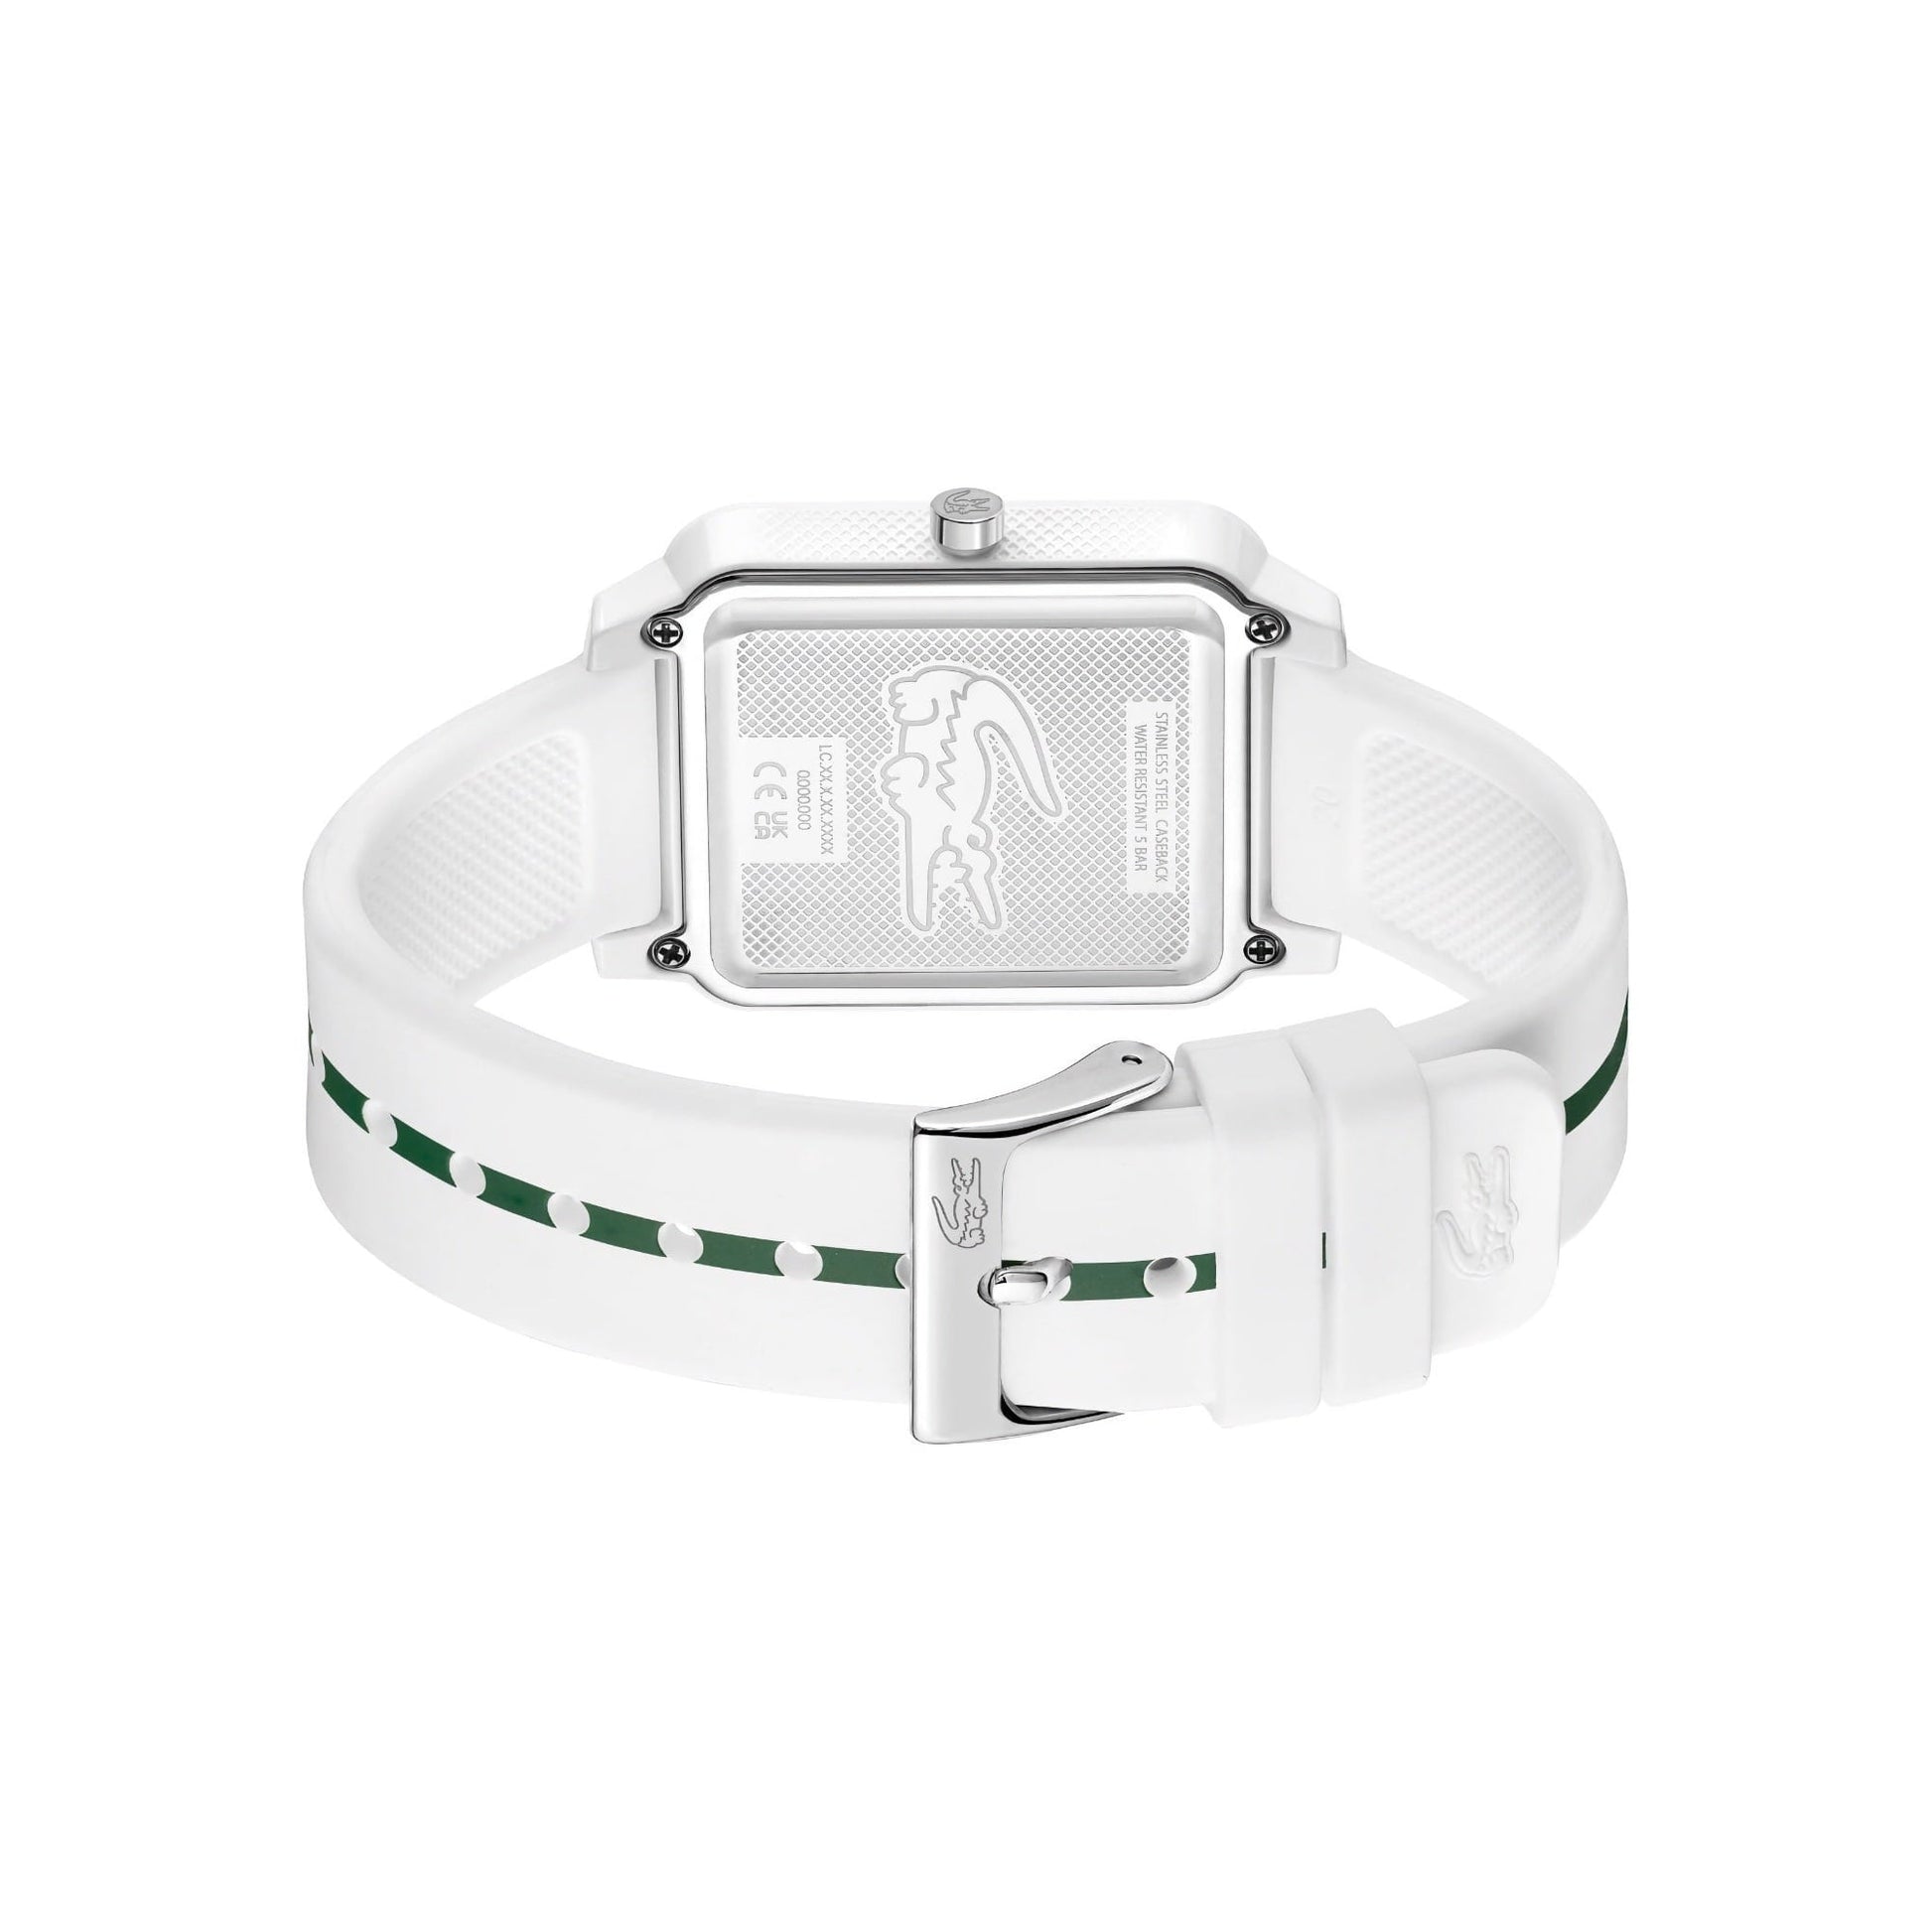 A Lacoste.12.12 Studio 3 Hands Watch White Silicone with green straps on a white background.